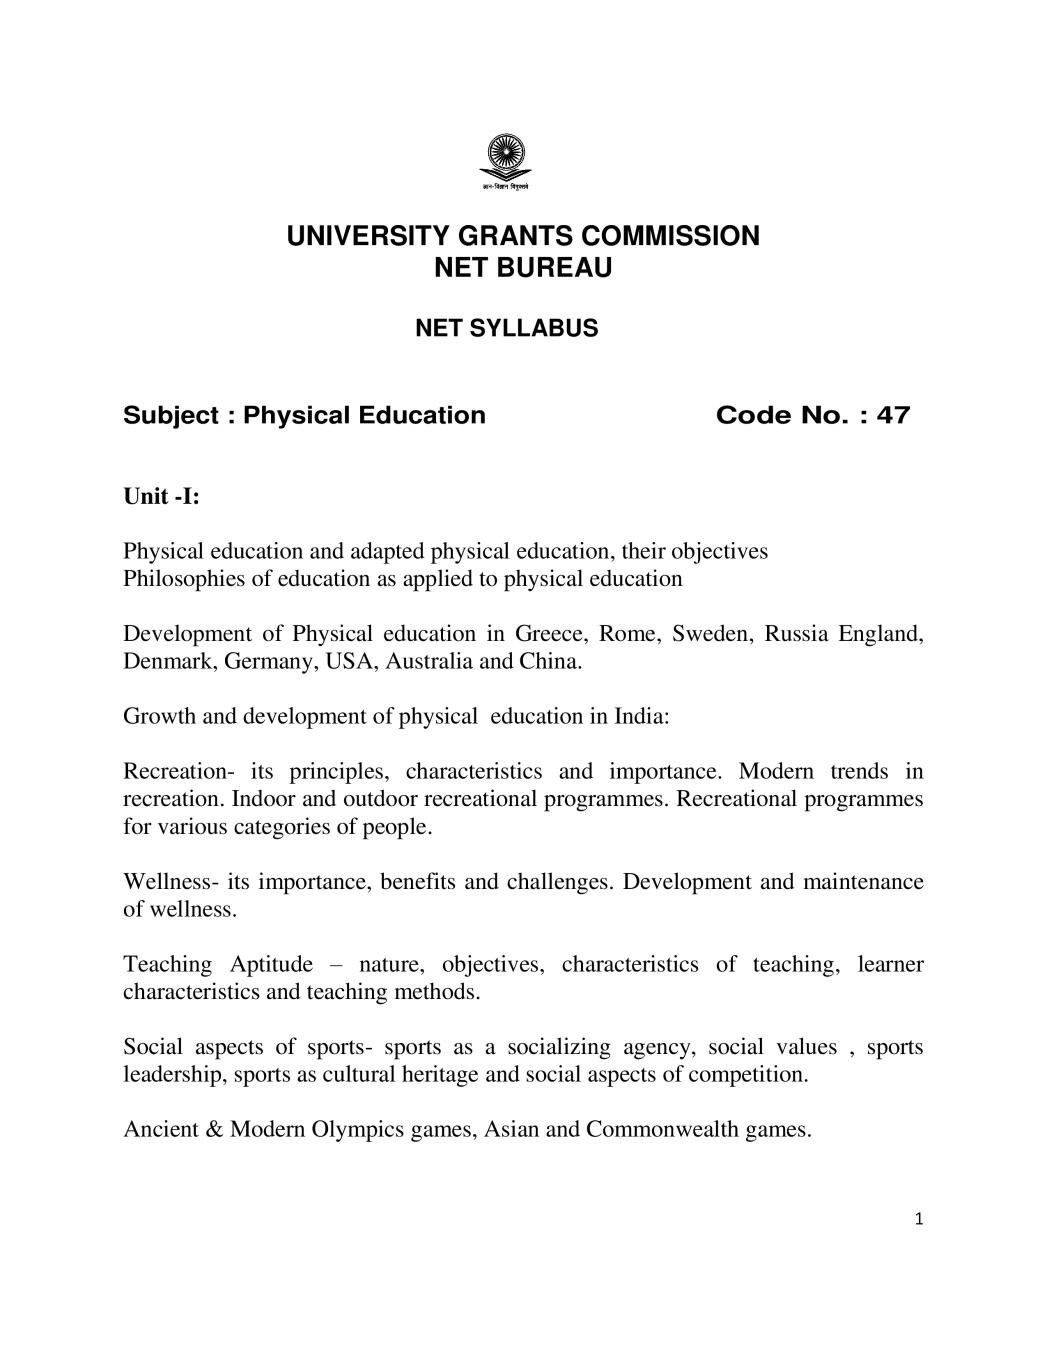 UGC NET Syllabus for Physical Education 2020 - Page 1